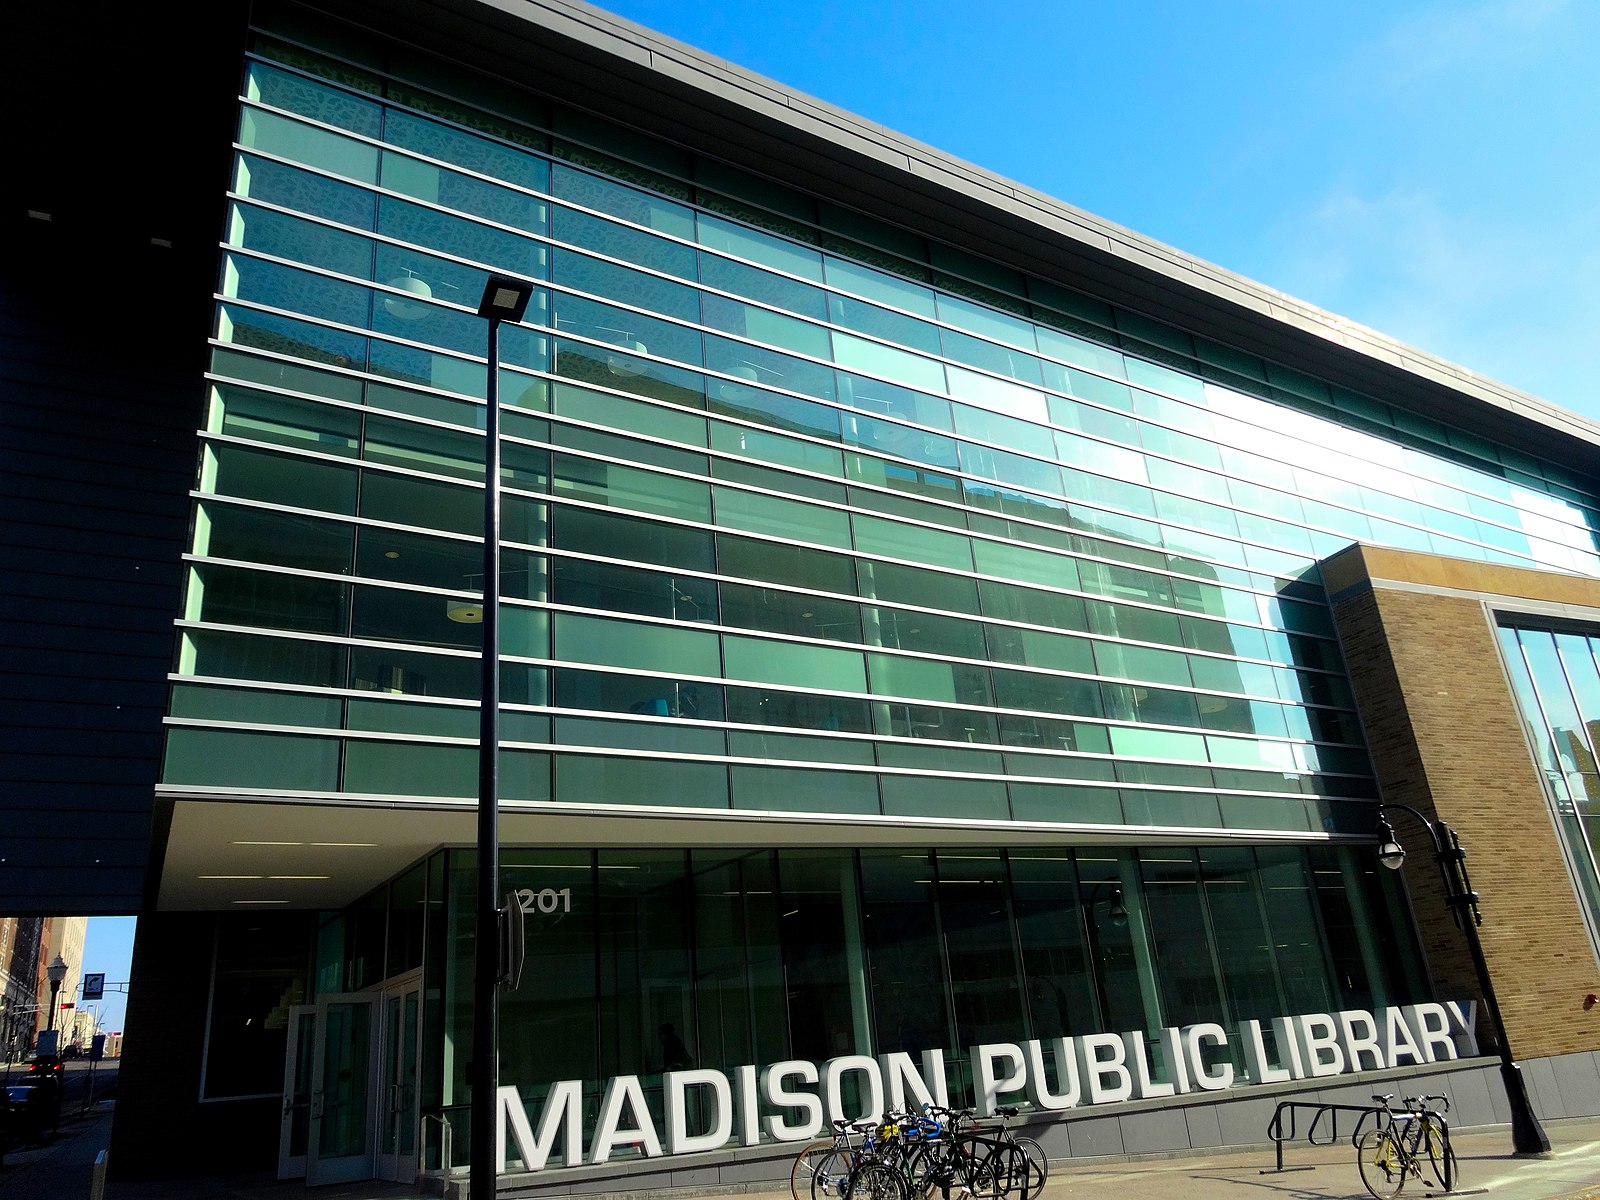 Libraries prepare for curbside service